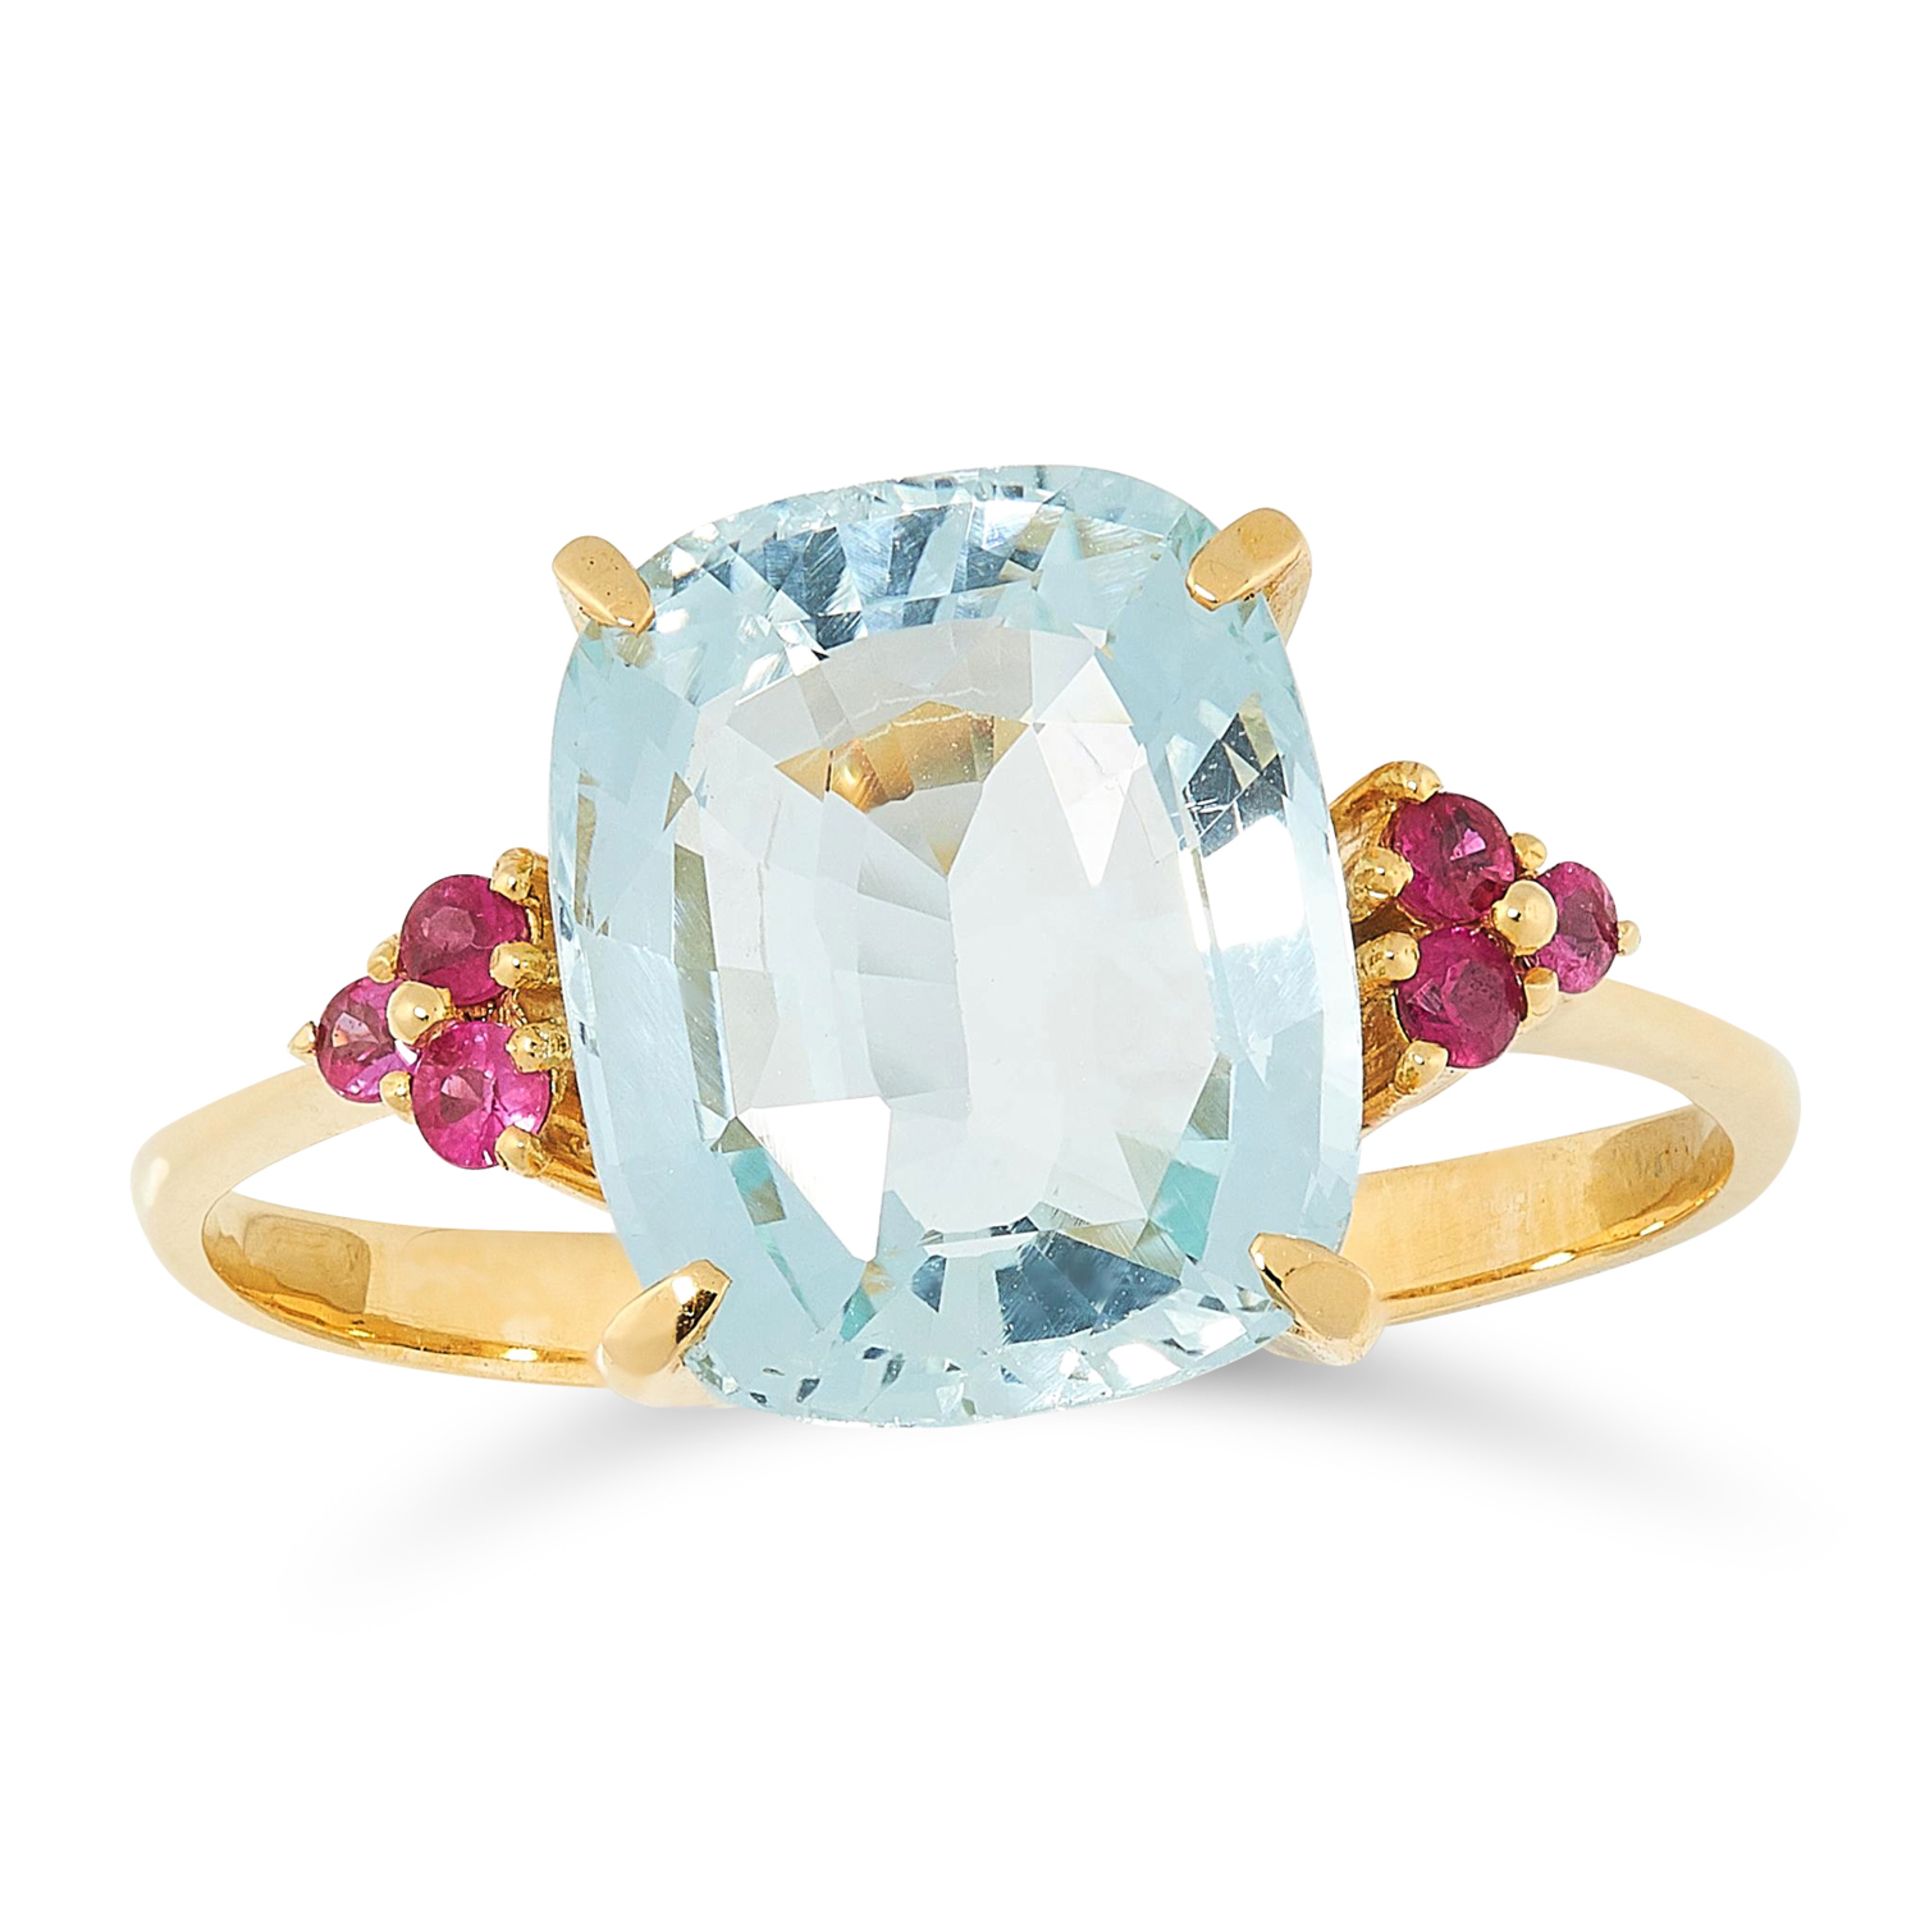 AN AQUAMARINE AND RUBY RING in yellow gold, set with a cushion cut aquamarine between trios of round